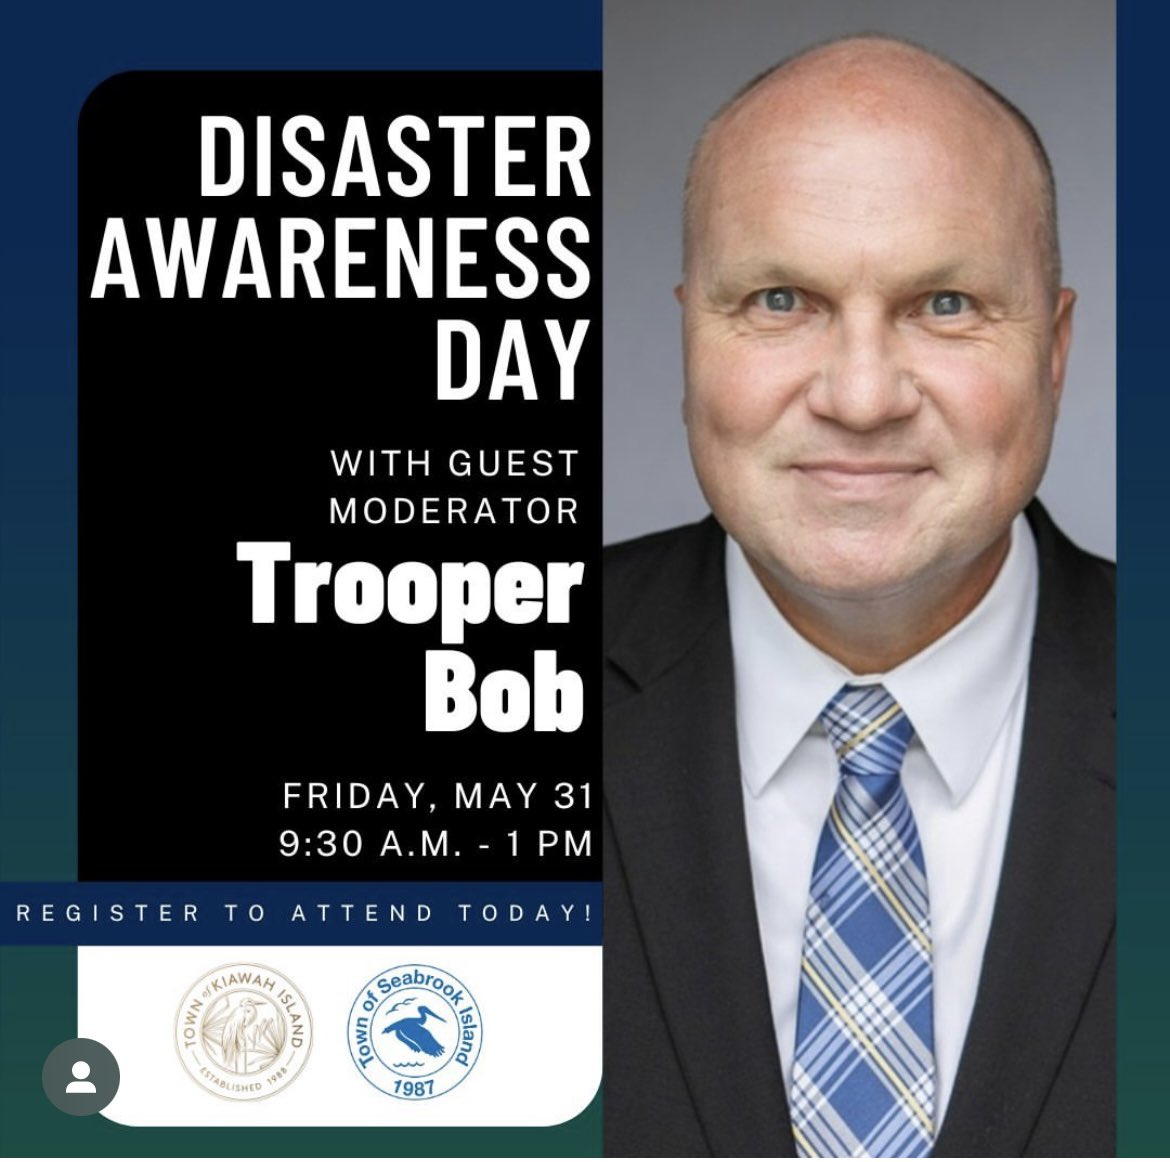 This year’s Disaster Awareness Day will be held on Friday, May 31 from 9:30 a.m. to 1 p.m. at the Sandcastle! We have an exciting lineup this year and hope you can join us to learn more about how you and your loved ones can prepare for this upcoming hurricane season.